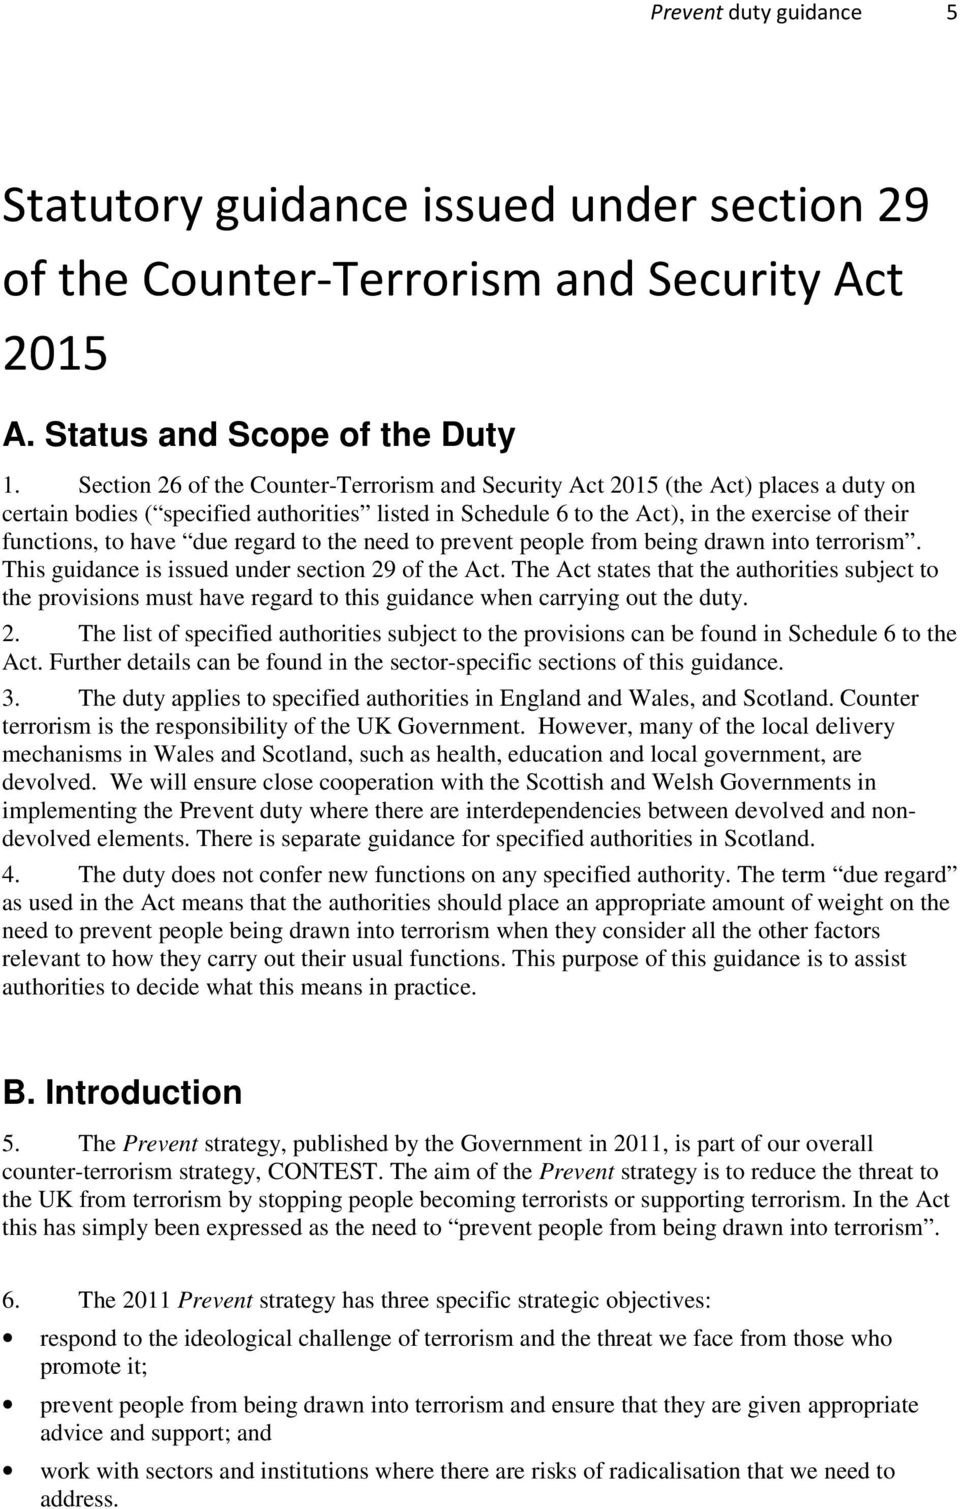 have due regard to the need to prevent people from being drawn into terrorism. This guidance is issued under section 29 of the Act.